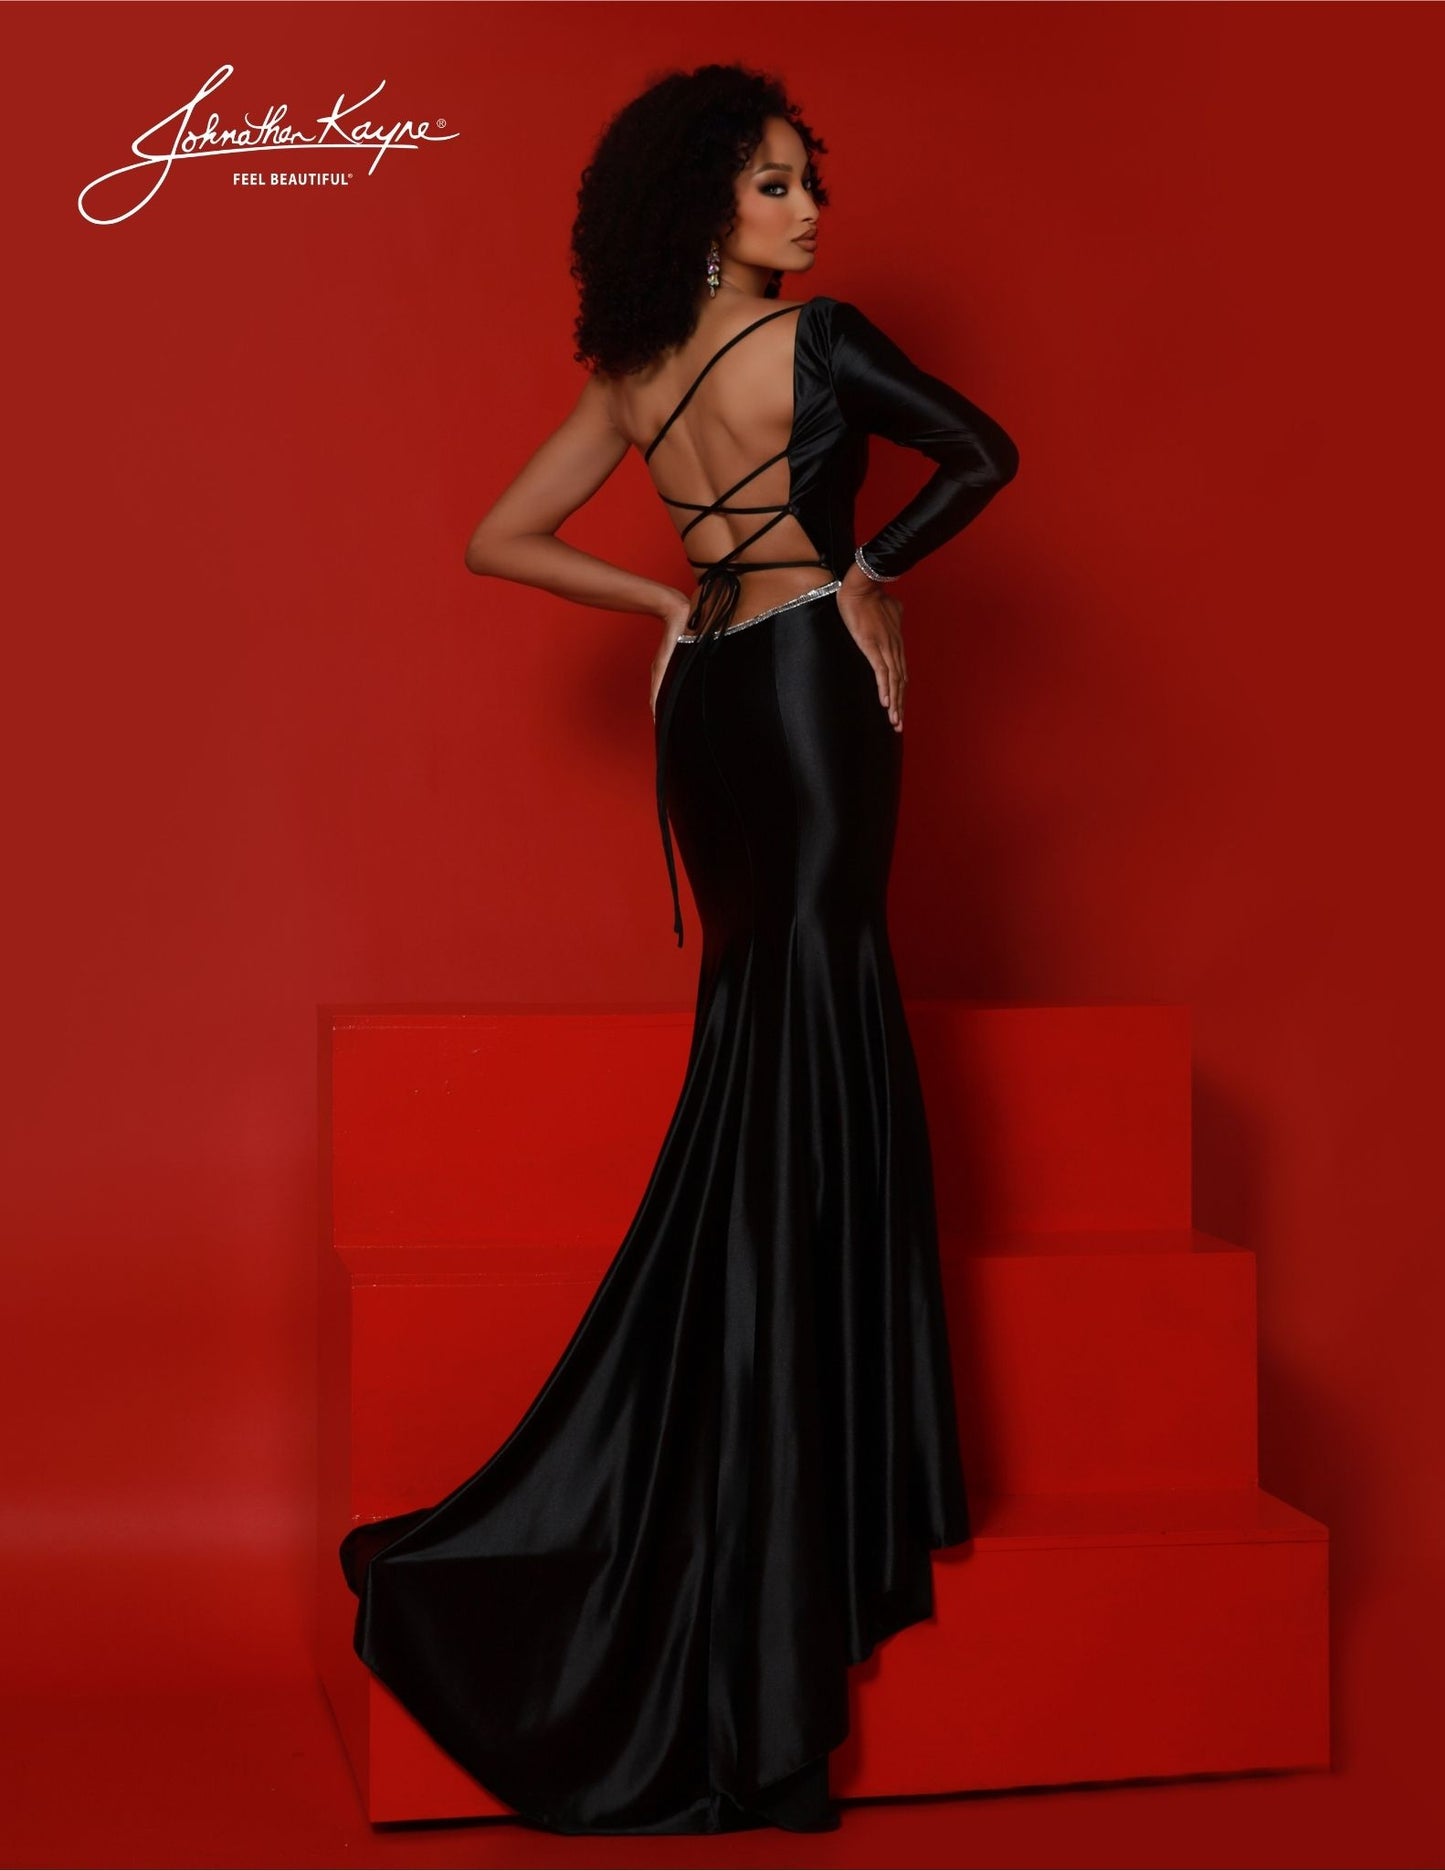 Johnathan Kayne 2859 is designed for an unforgettable look. The one-shoulder long sleeve fitted gown features a corset back and mermaid tail silhouette. Defined by intricate details and exquisite craftsmanship, this is the perfect dress for any special occasion. Get ready to dazzle, delight, and dominate the scene in this one-shoulder long sleeve gown. Crafted from Shiny 4 Way Stretch Lycra, this gown is truly a showstopper. The open corset back and thigh-high slit is sure to bring a dash of drama!